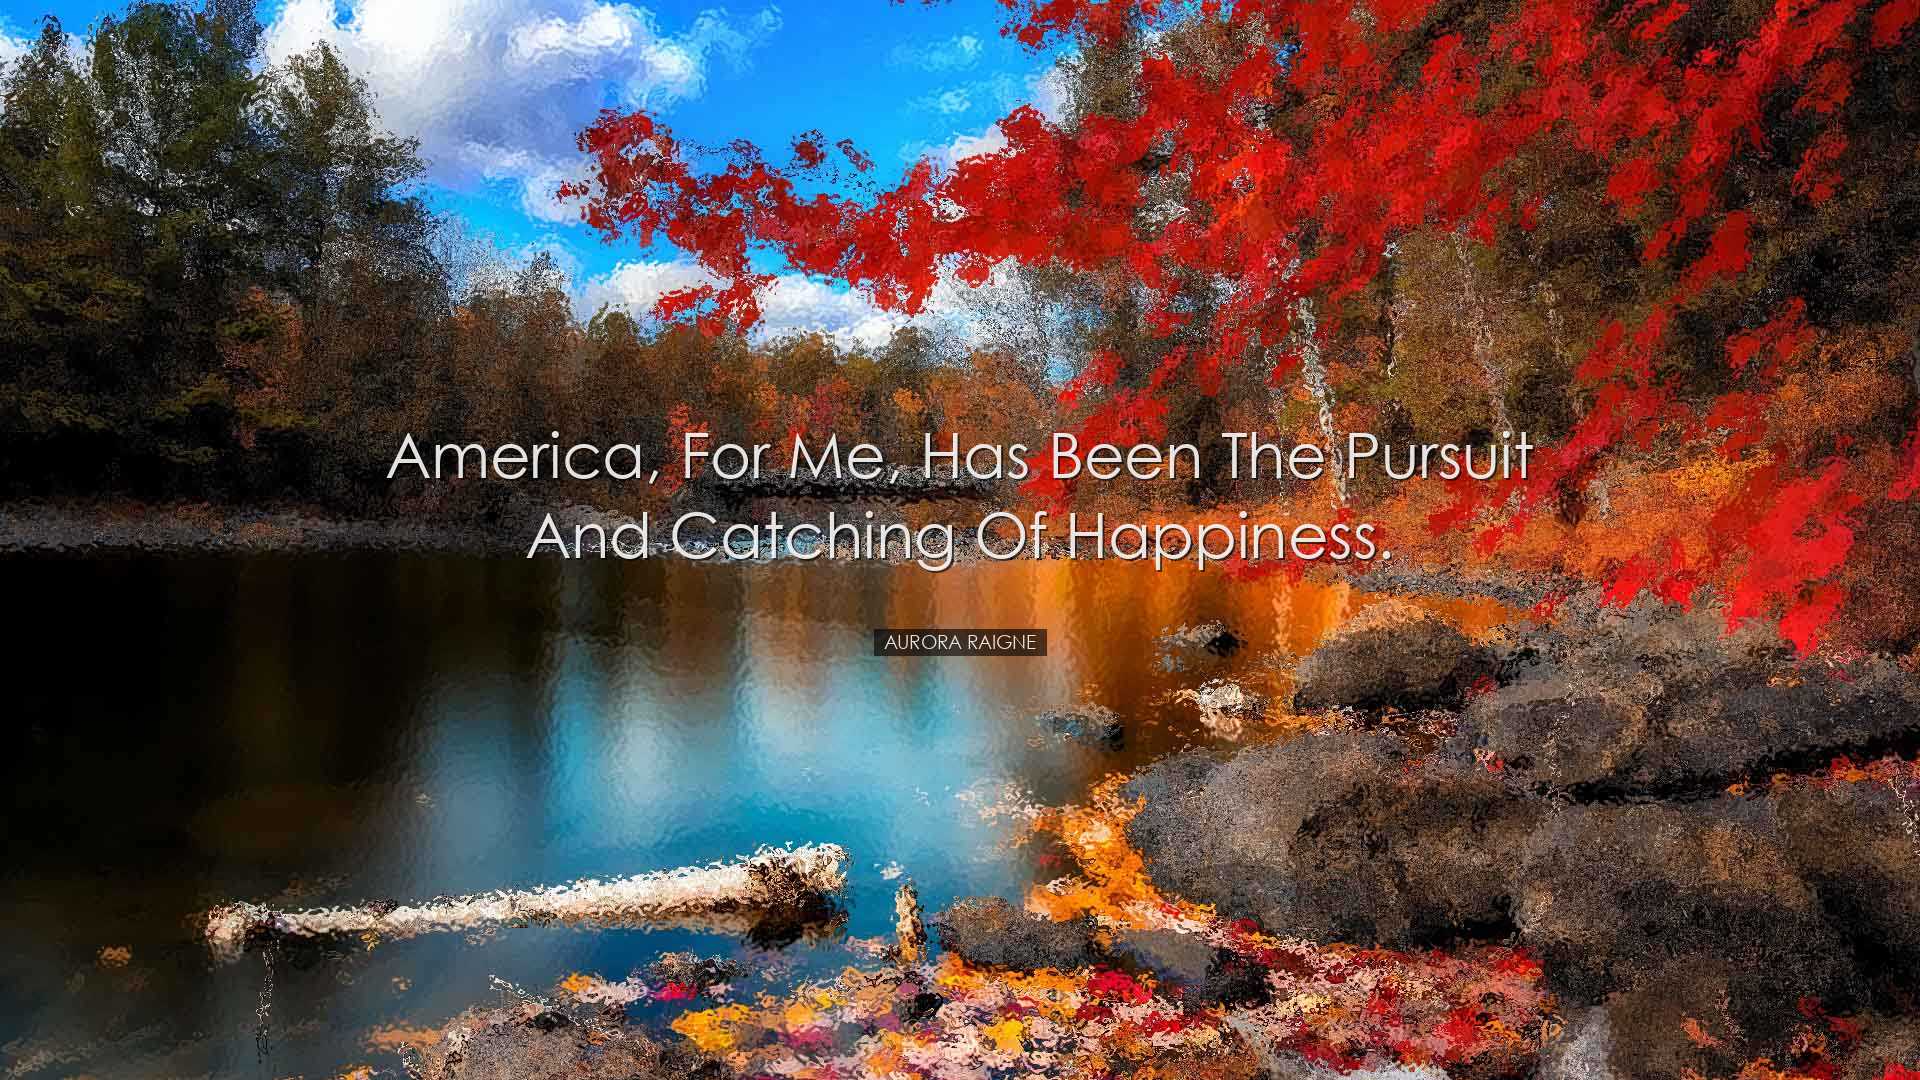 America, for me, has been the pursuit and catching of happiness. -